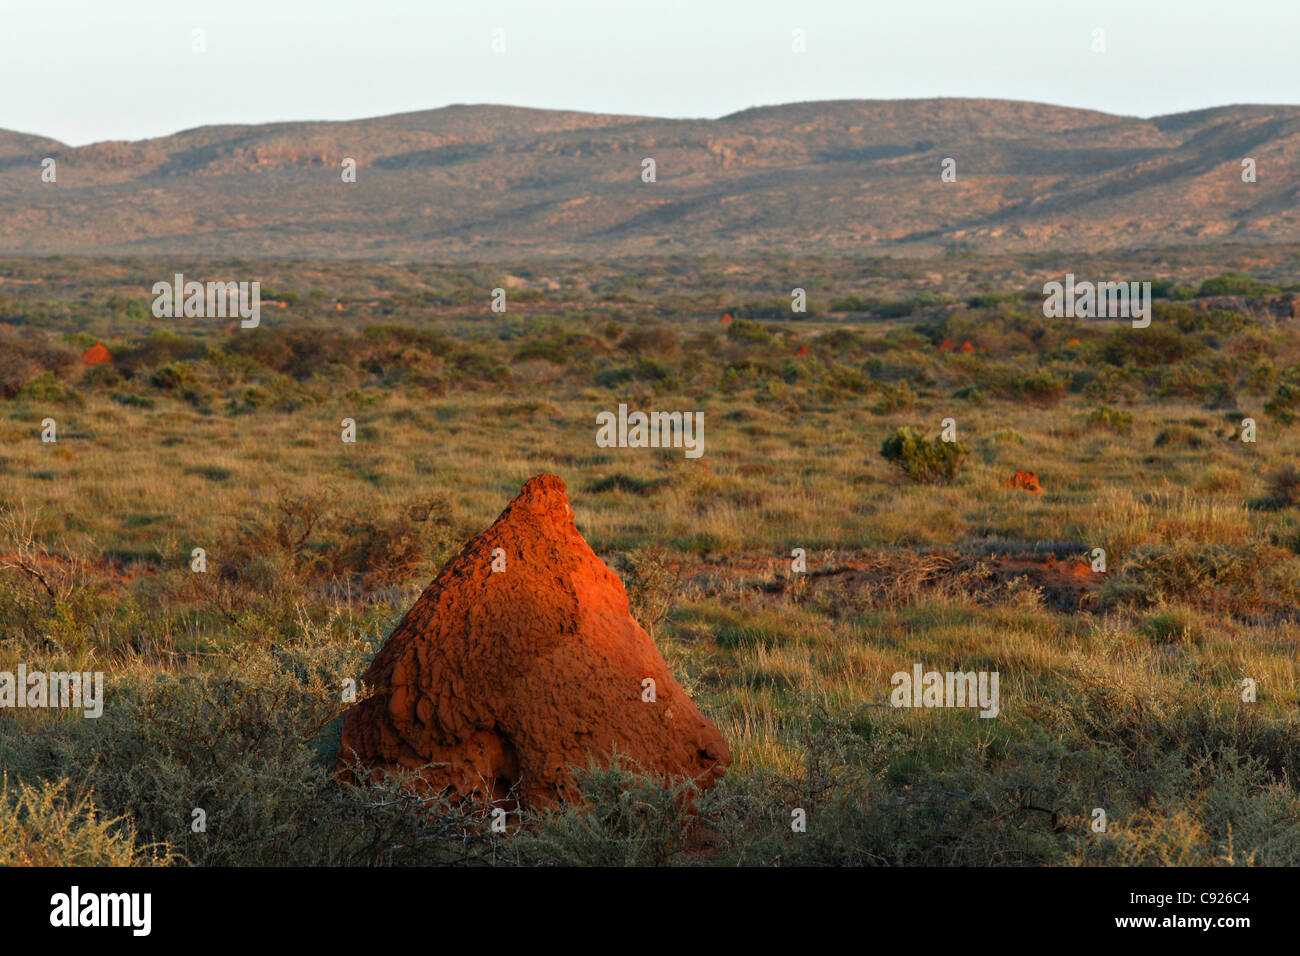 Red Termite Mound in Australian outback landscape, Exmouth Western Australia Stock Photo